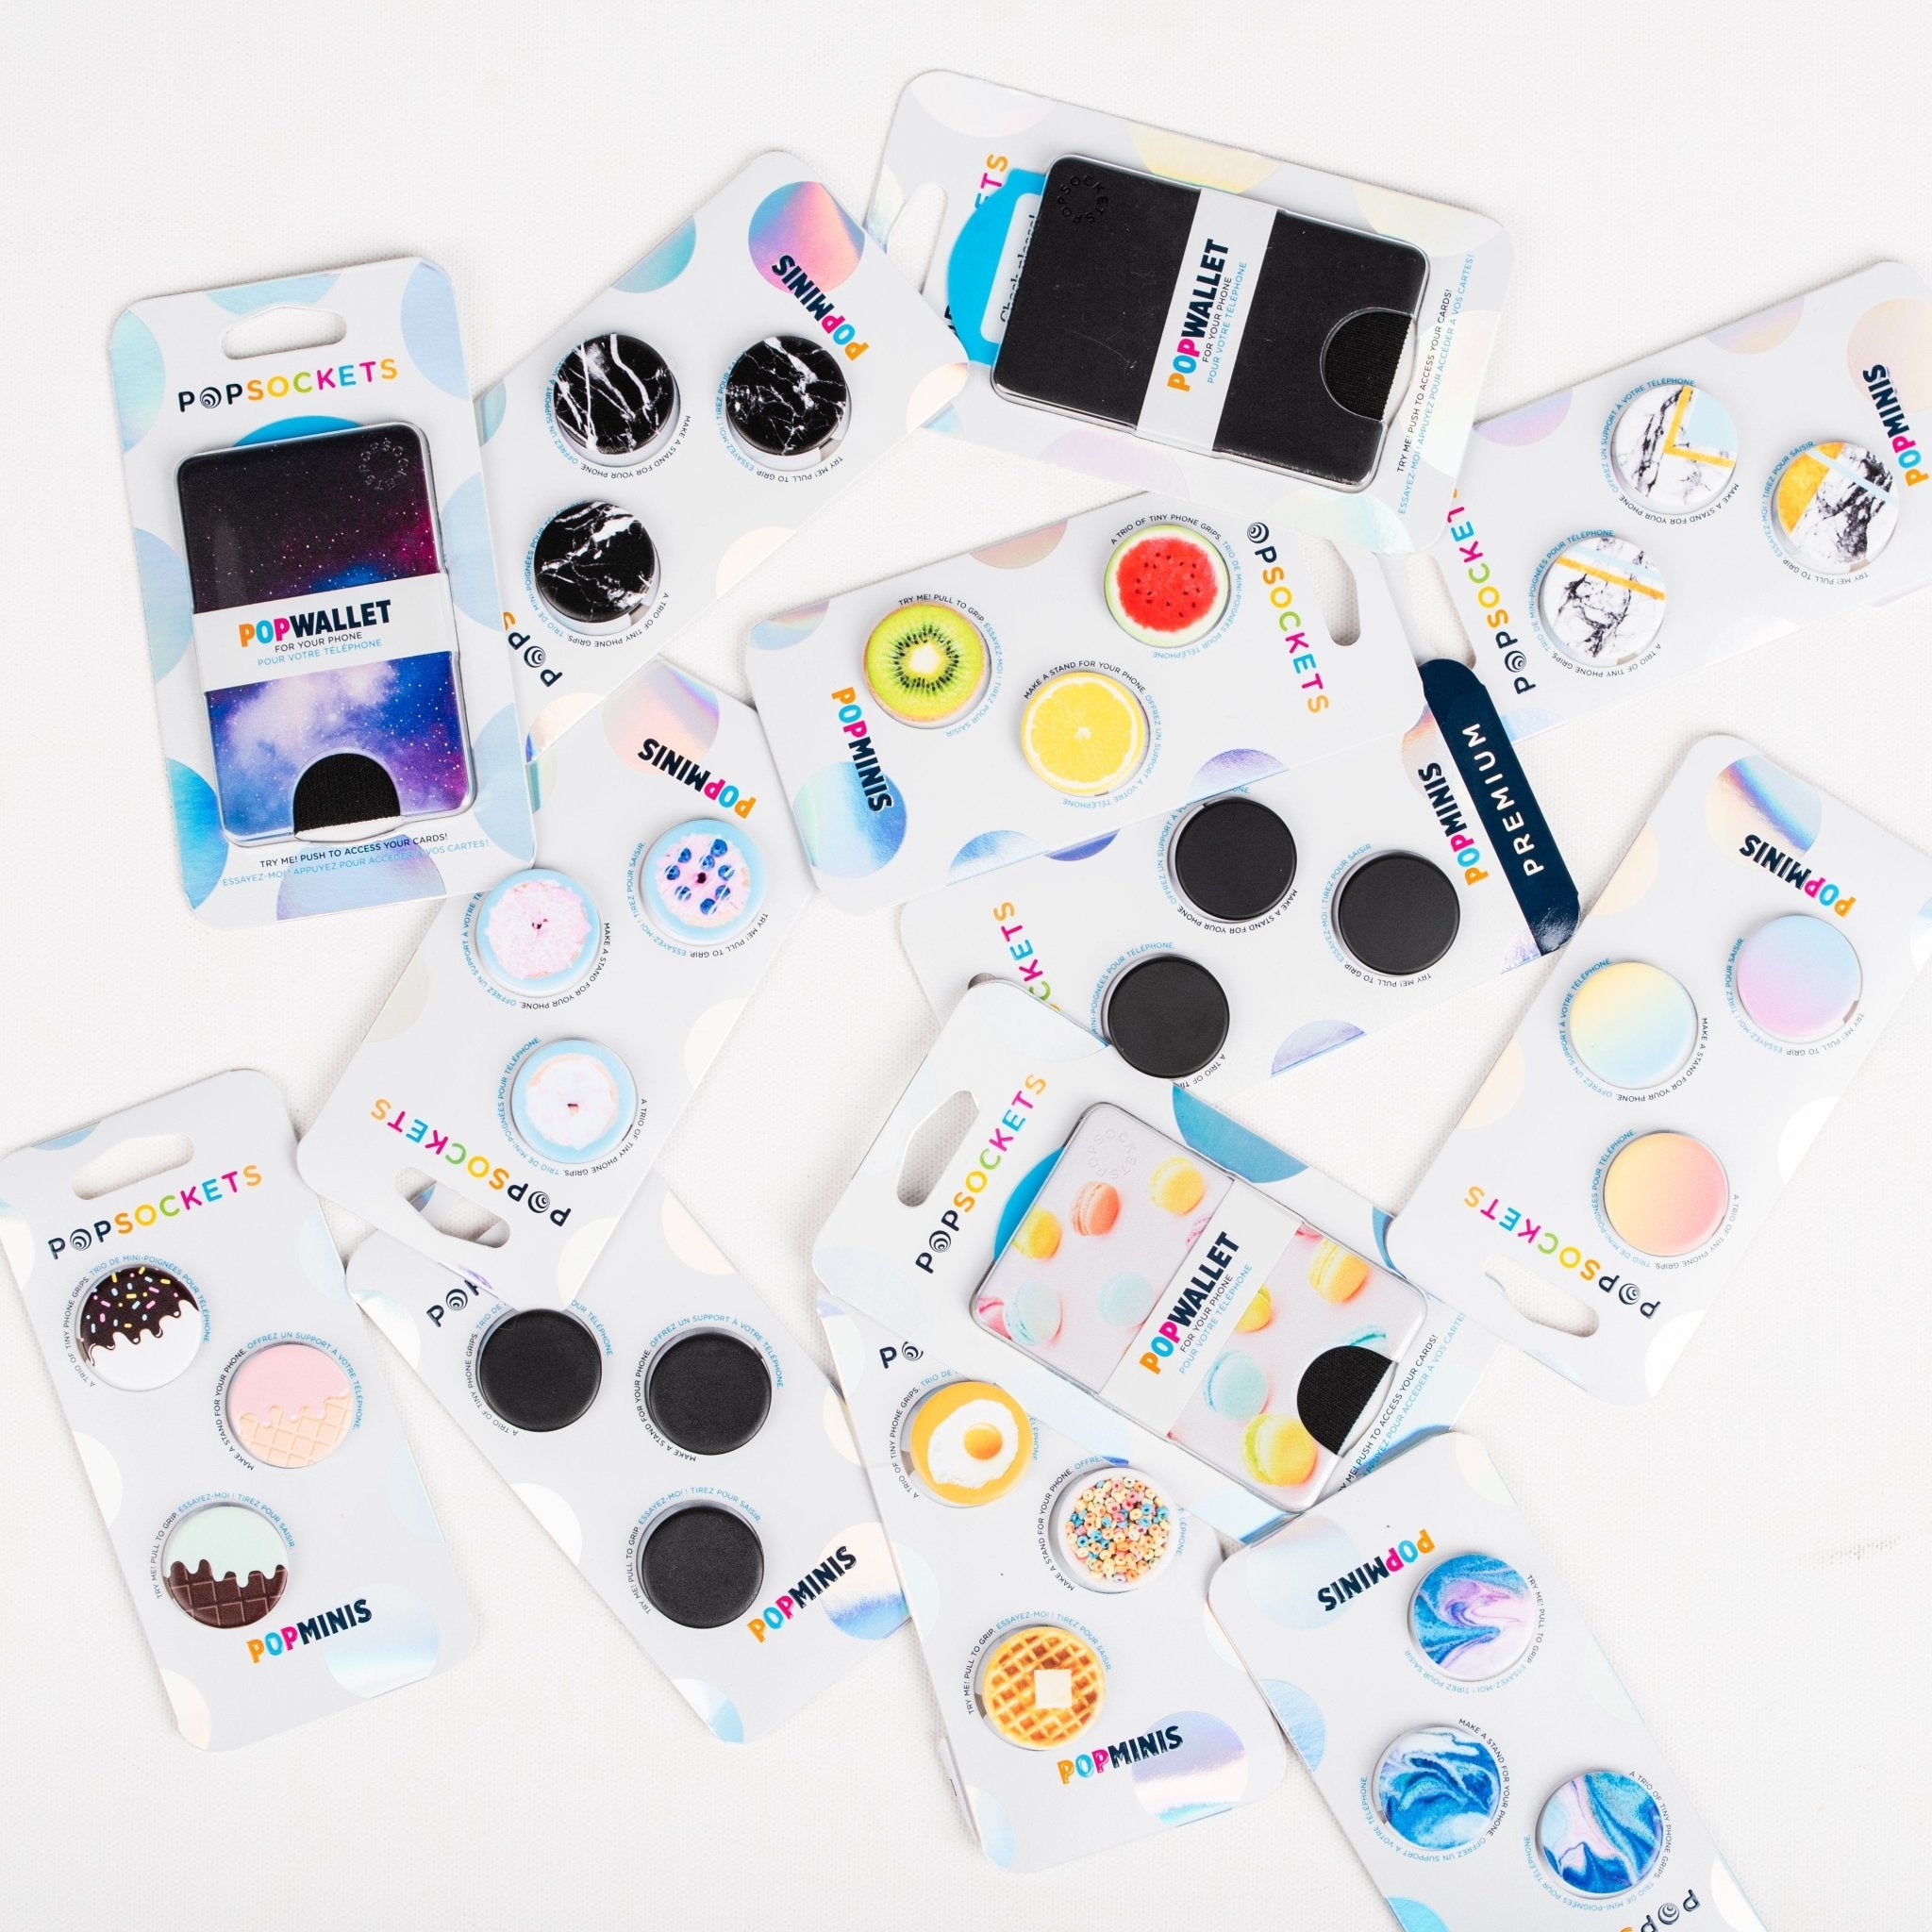 PopSockets | Lush Fashion Lounge women's clothing boutique in Oklahoma City: cute PopSocket designs, trendy new PopSockets, best boutiques in OKC, iPhone accessories in OKC, cute phone accessories OKC. Photo of PopSockets on a white board